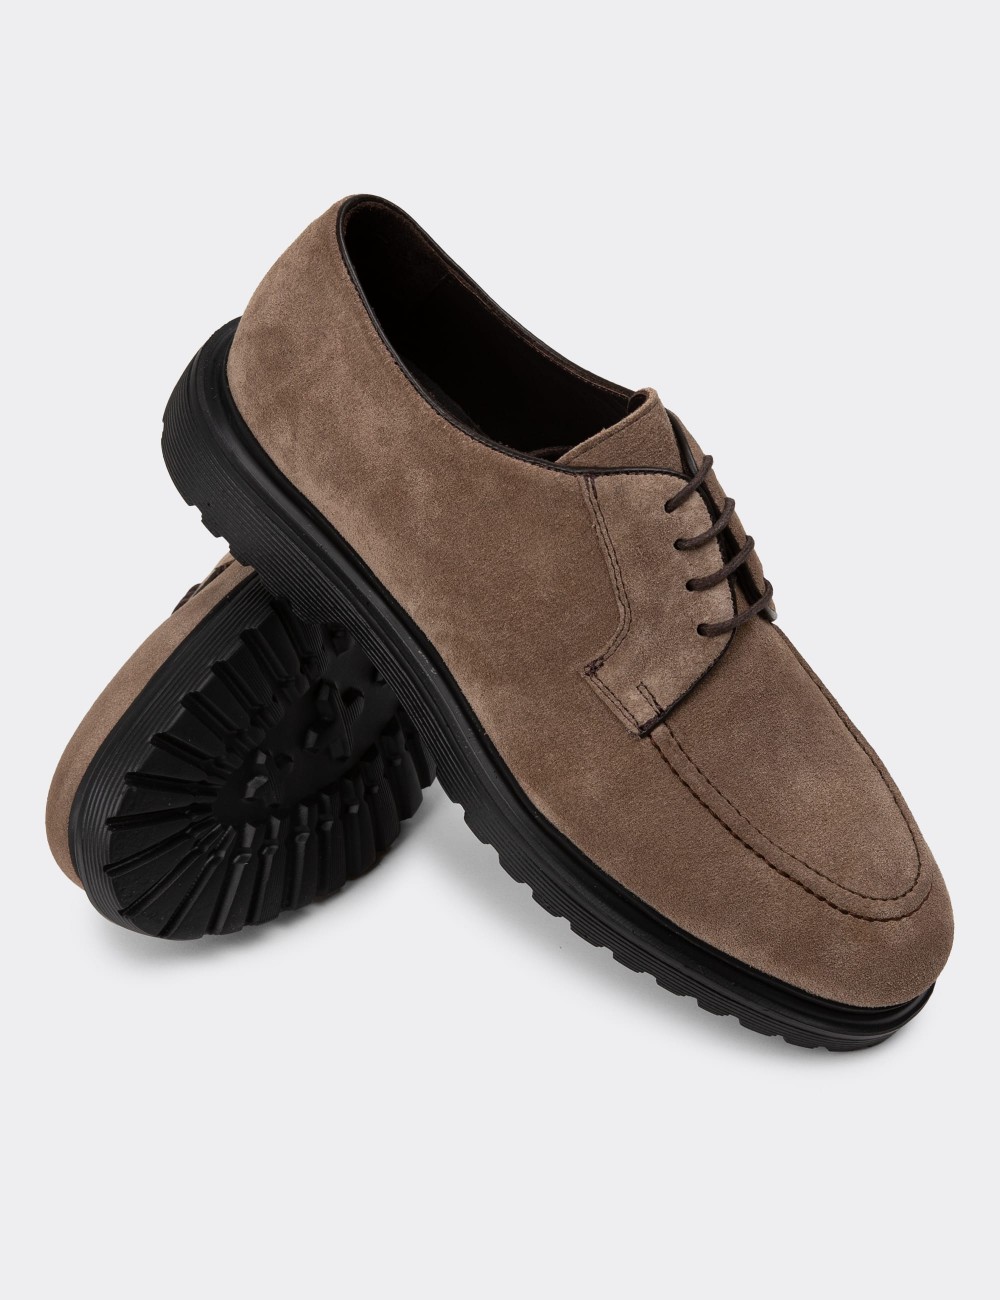 Sandstone Suede Leather Lace-up Shoes - 01931MVZNE01